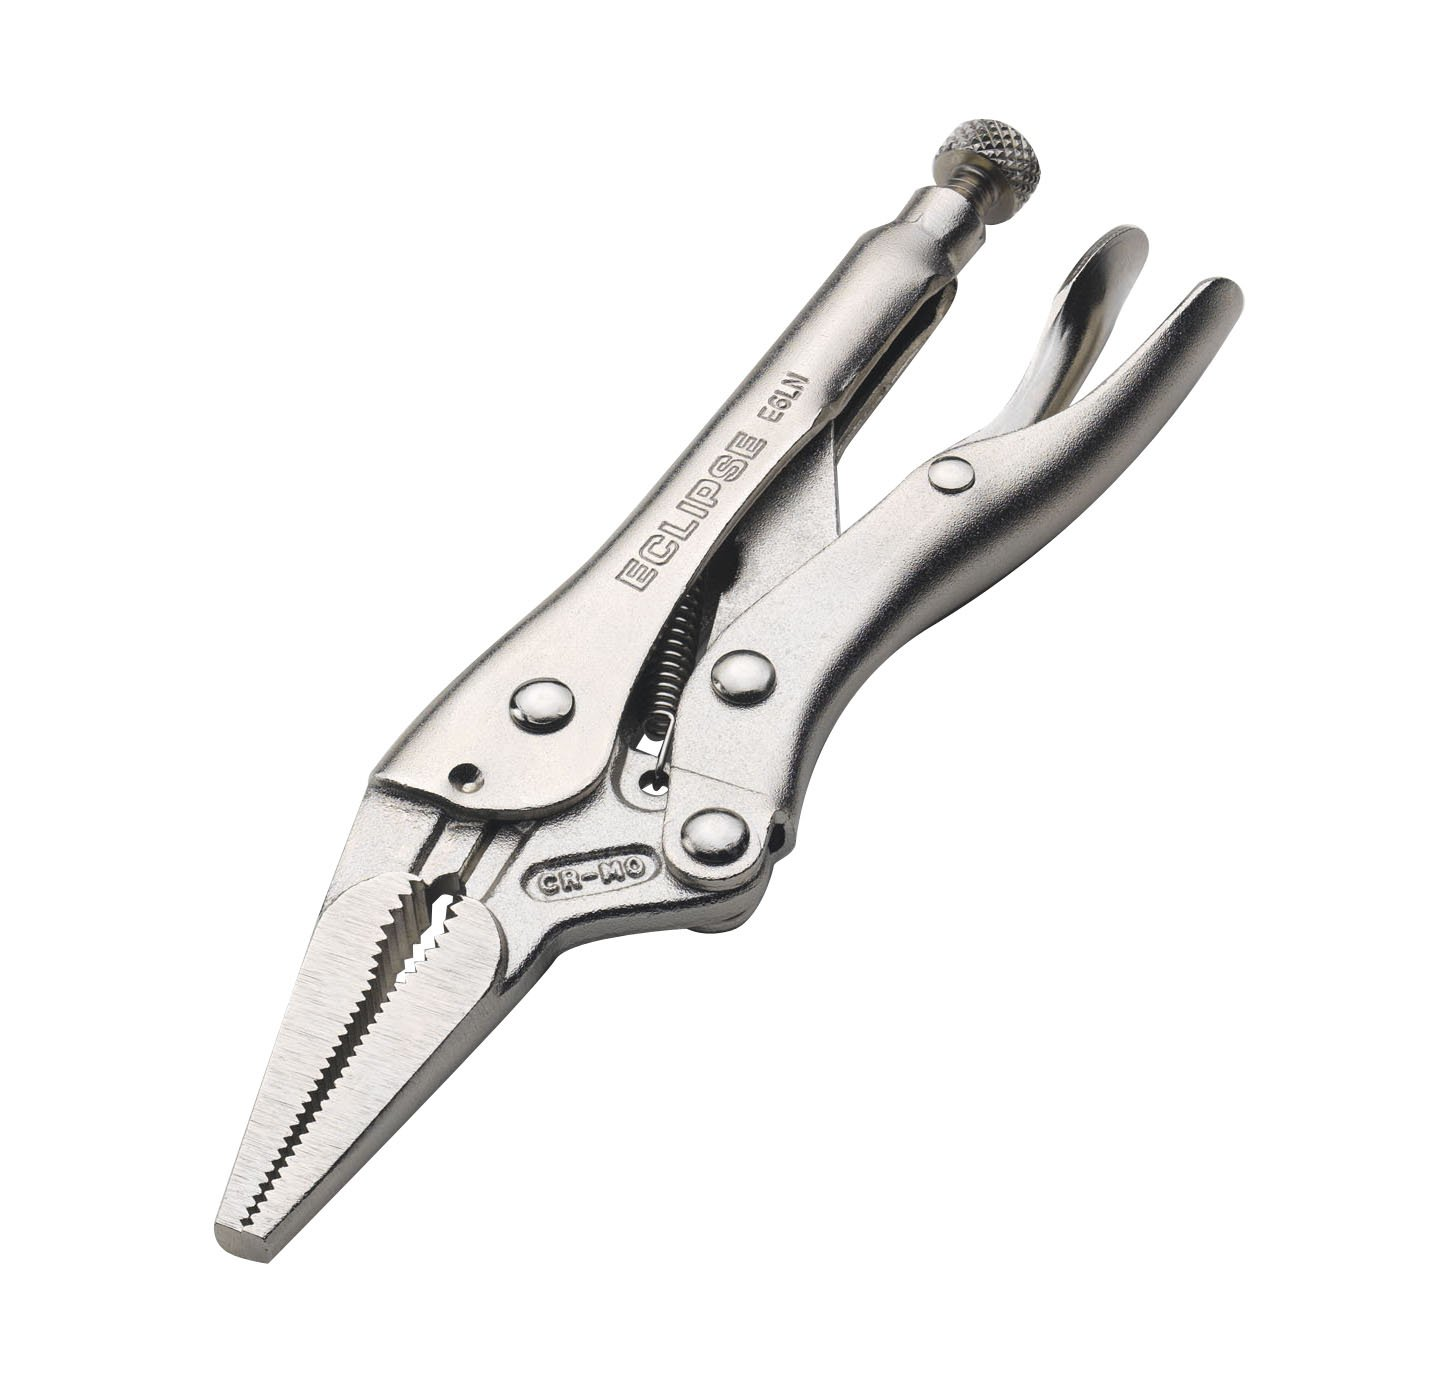 Eclipse E6LN - Long Nose Locking Pliers with Swivel Cutters in Chrome Molybdenum Steel, 6" Size, 2" Jaw Capacity